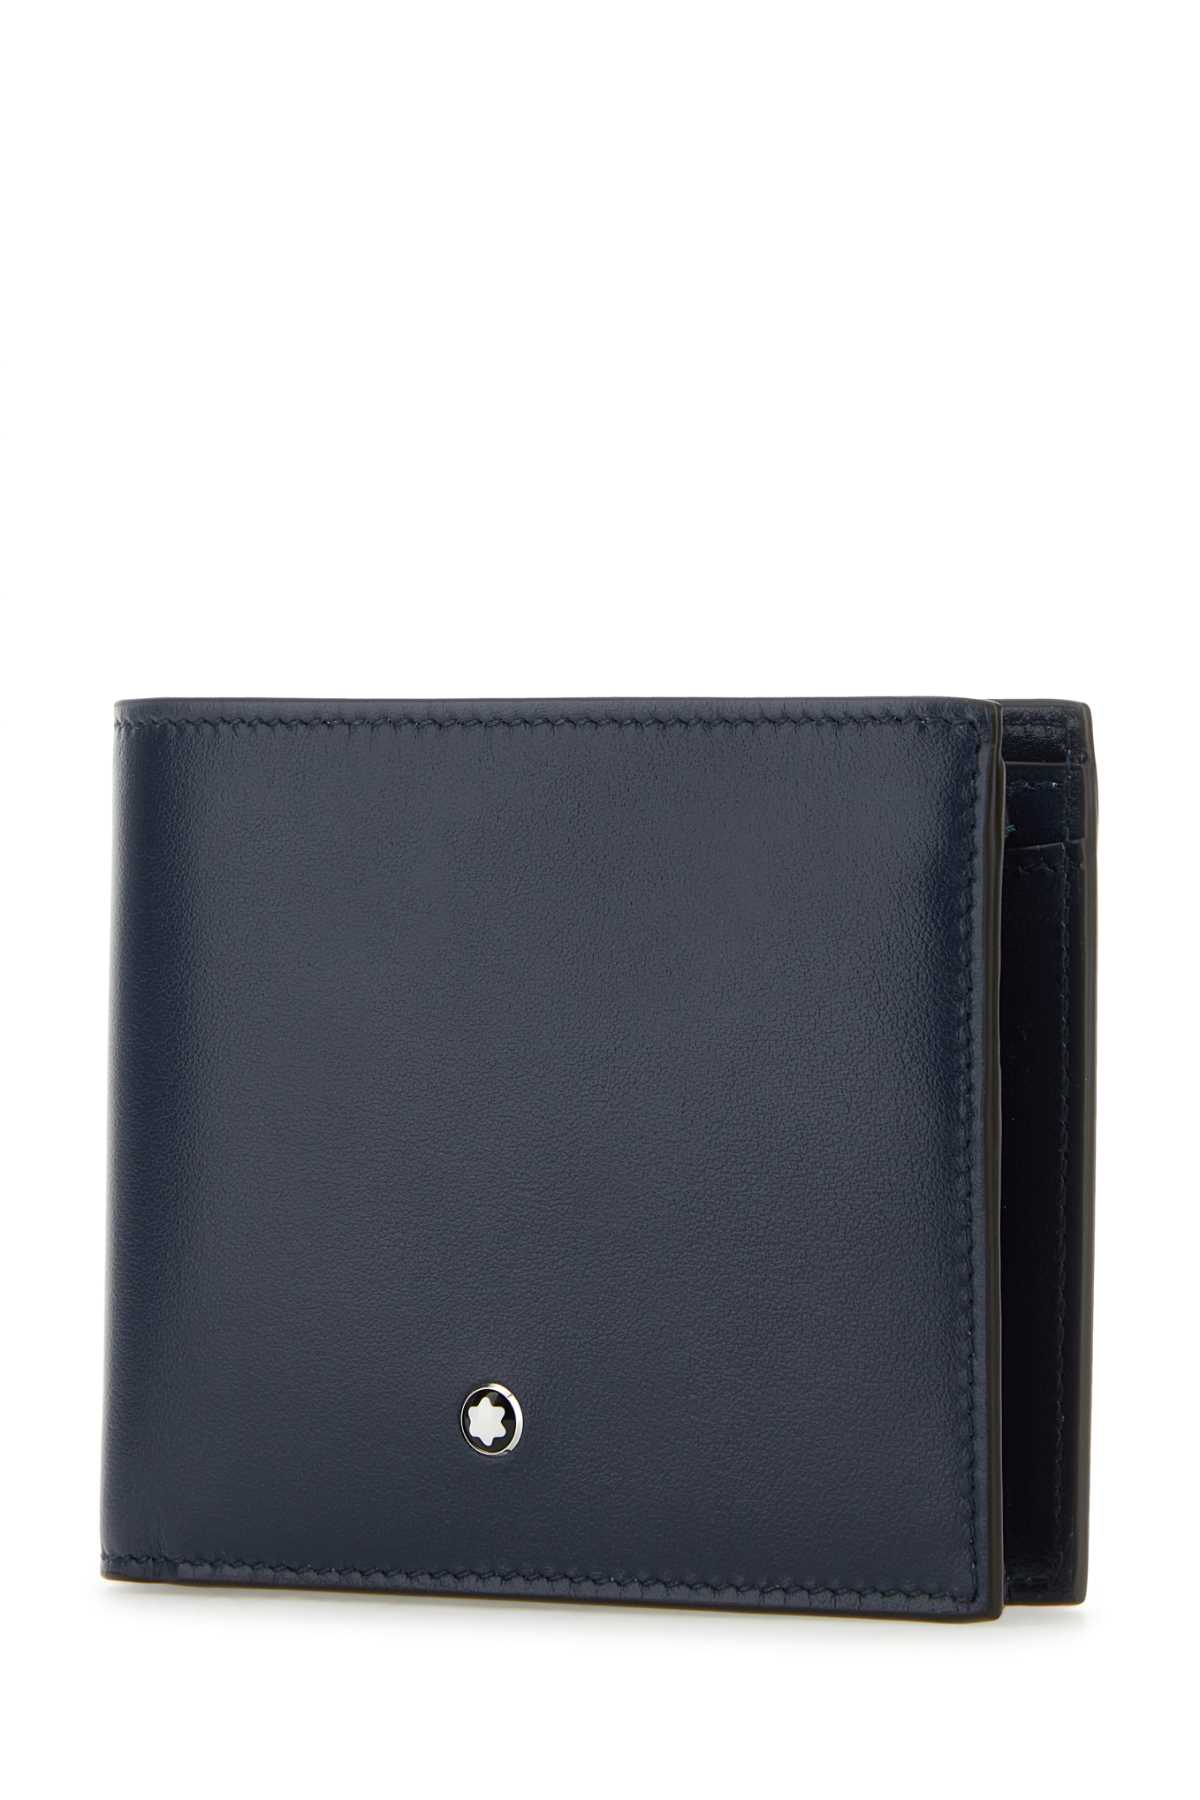 Montblanc Blue Leather Wallet In Inkblue